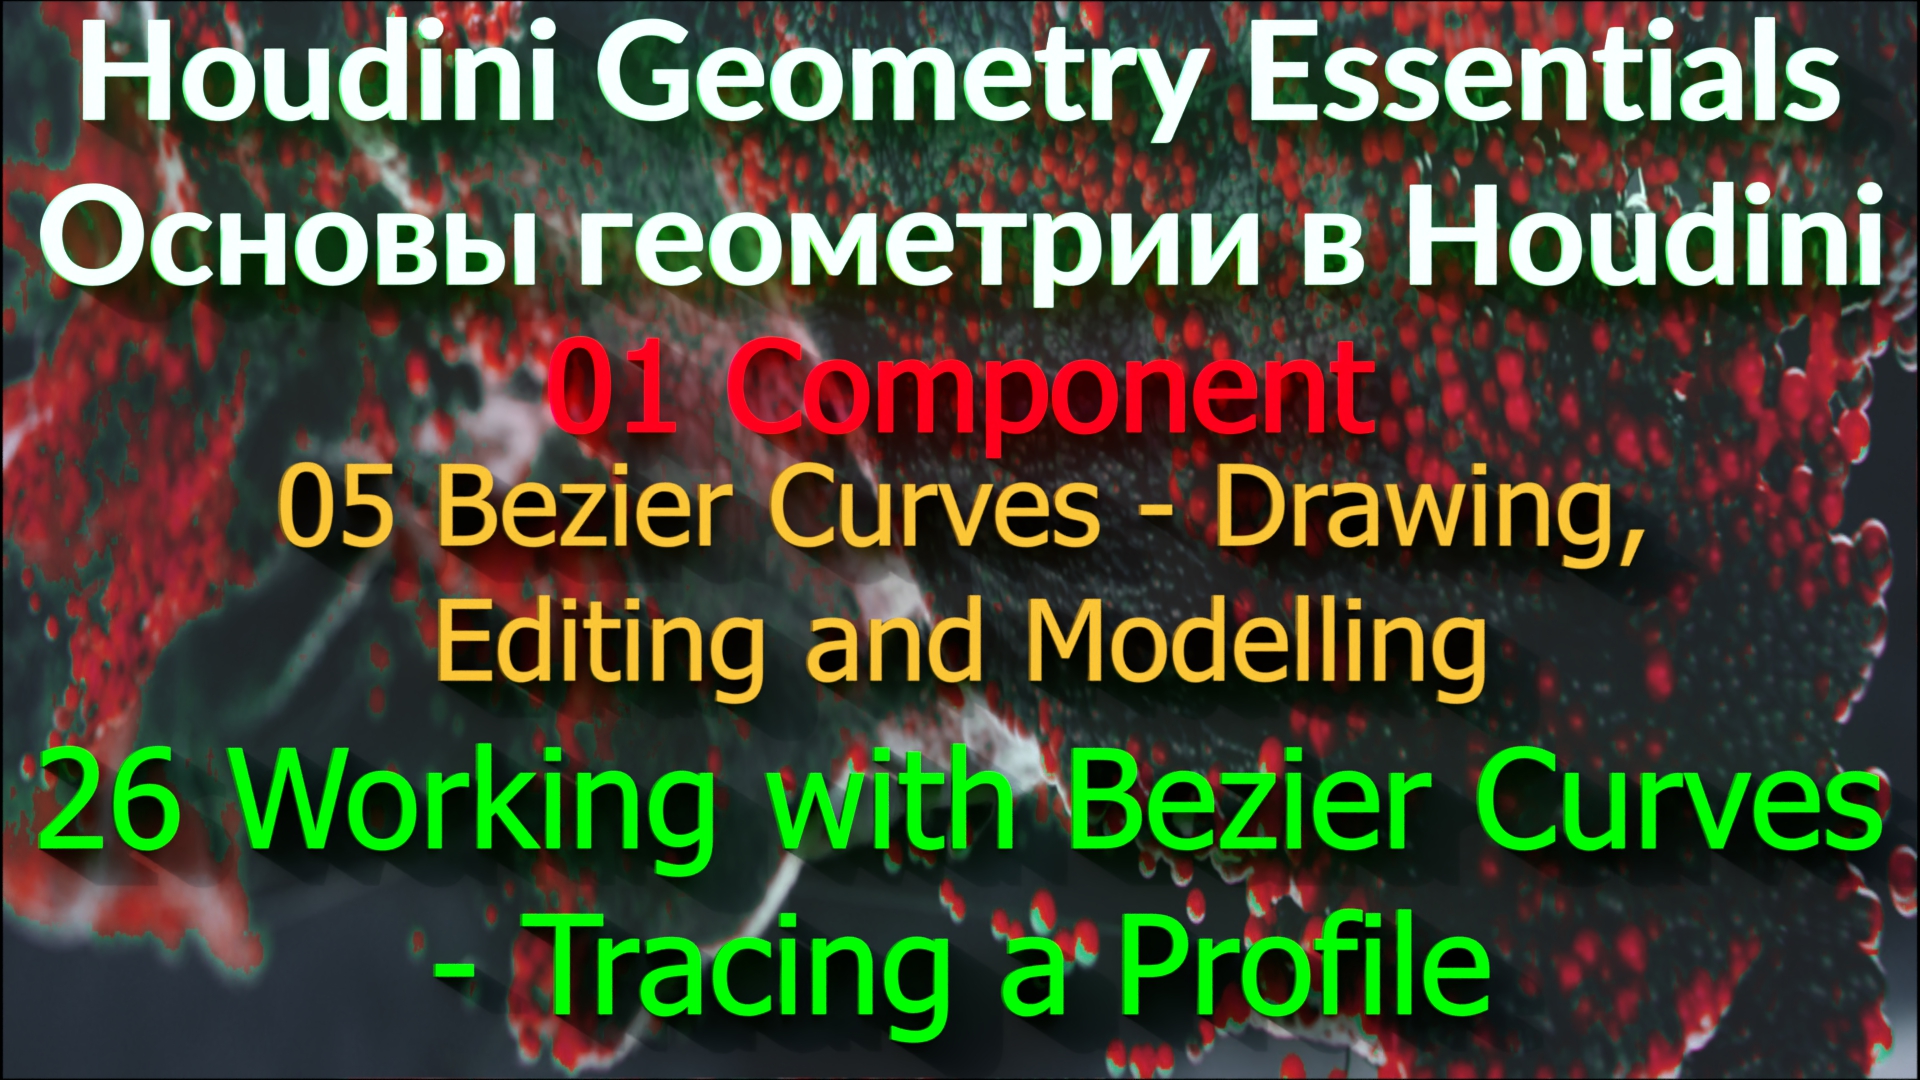 01_05_26. Working with Bezier Curves - Tracing a Profile